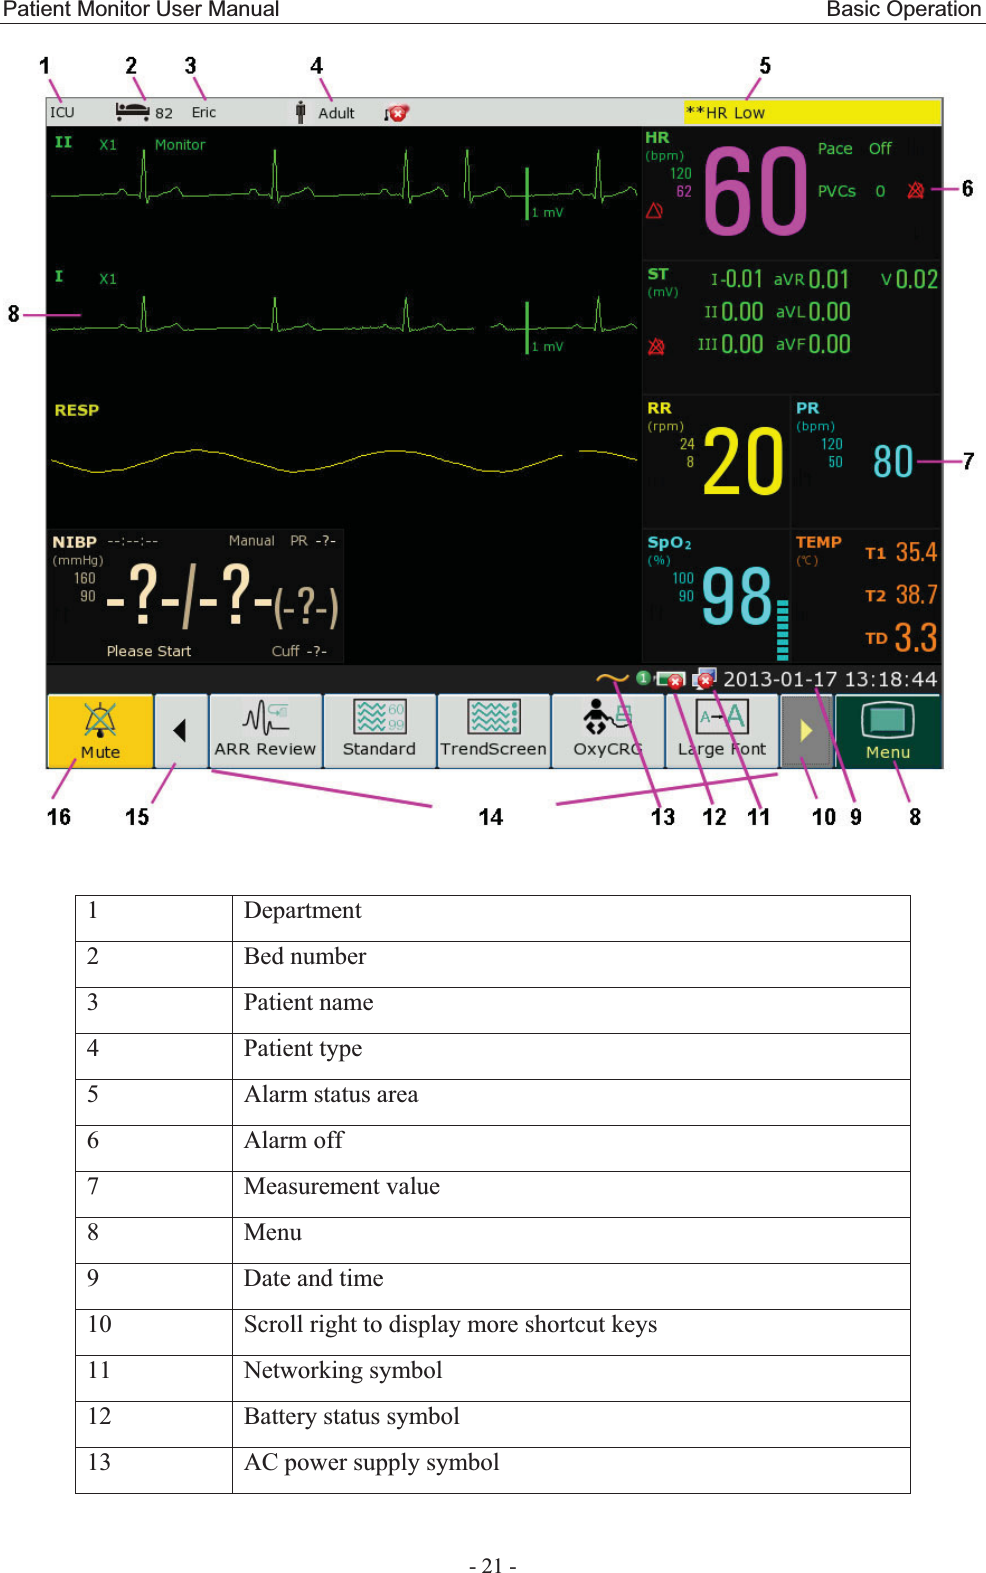 Patient Monitor User Manual                                                  Basic Operation  - 21 -   1 Department 2 Bed number 3 Patient name 4 Patient type 5  Alarm status area 6 Alarm off 7 Measurement value 8 Menu 9  Date and time 10  Scroll right to display more shortcut keys 11 Networking symbol 12 Battery status symbol 13  AC power supply symbol   